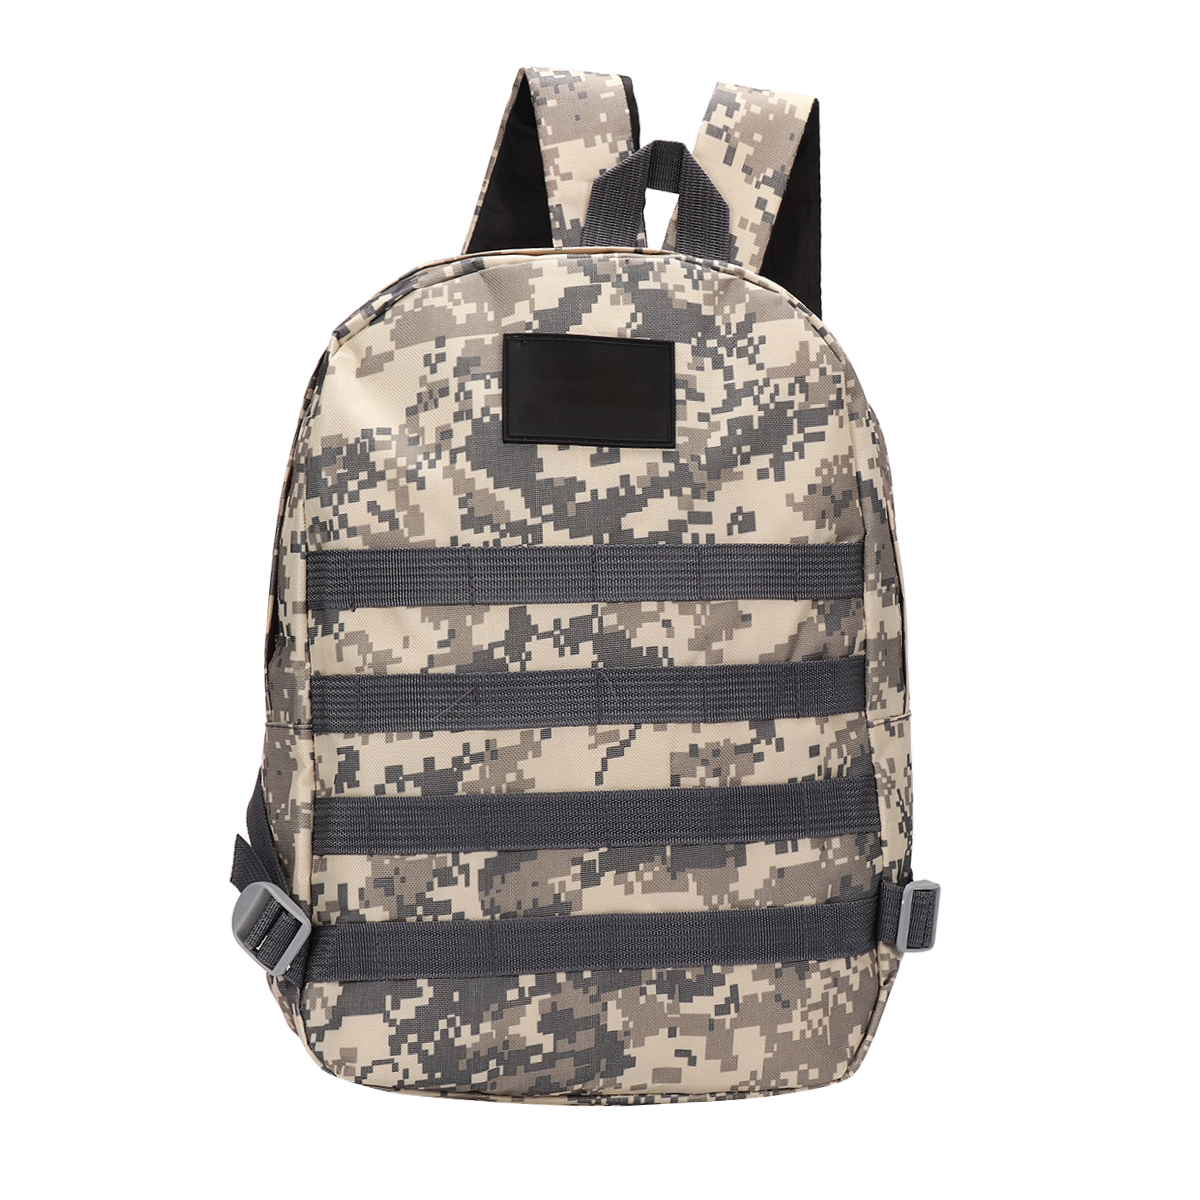 Camouflage-Large-Capacity-Oxford-Cloth-Macbook-Mobile-Phone-Storage-Bag-Backpack-1860030-3